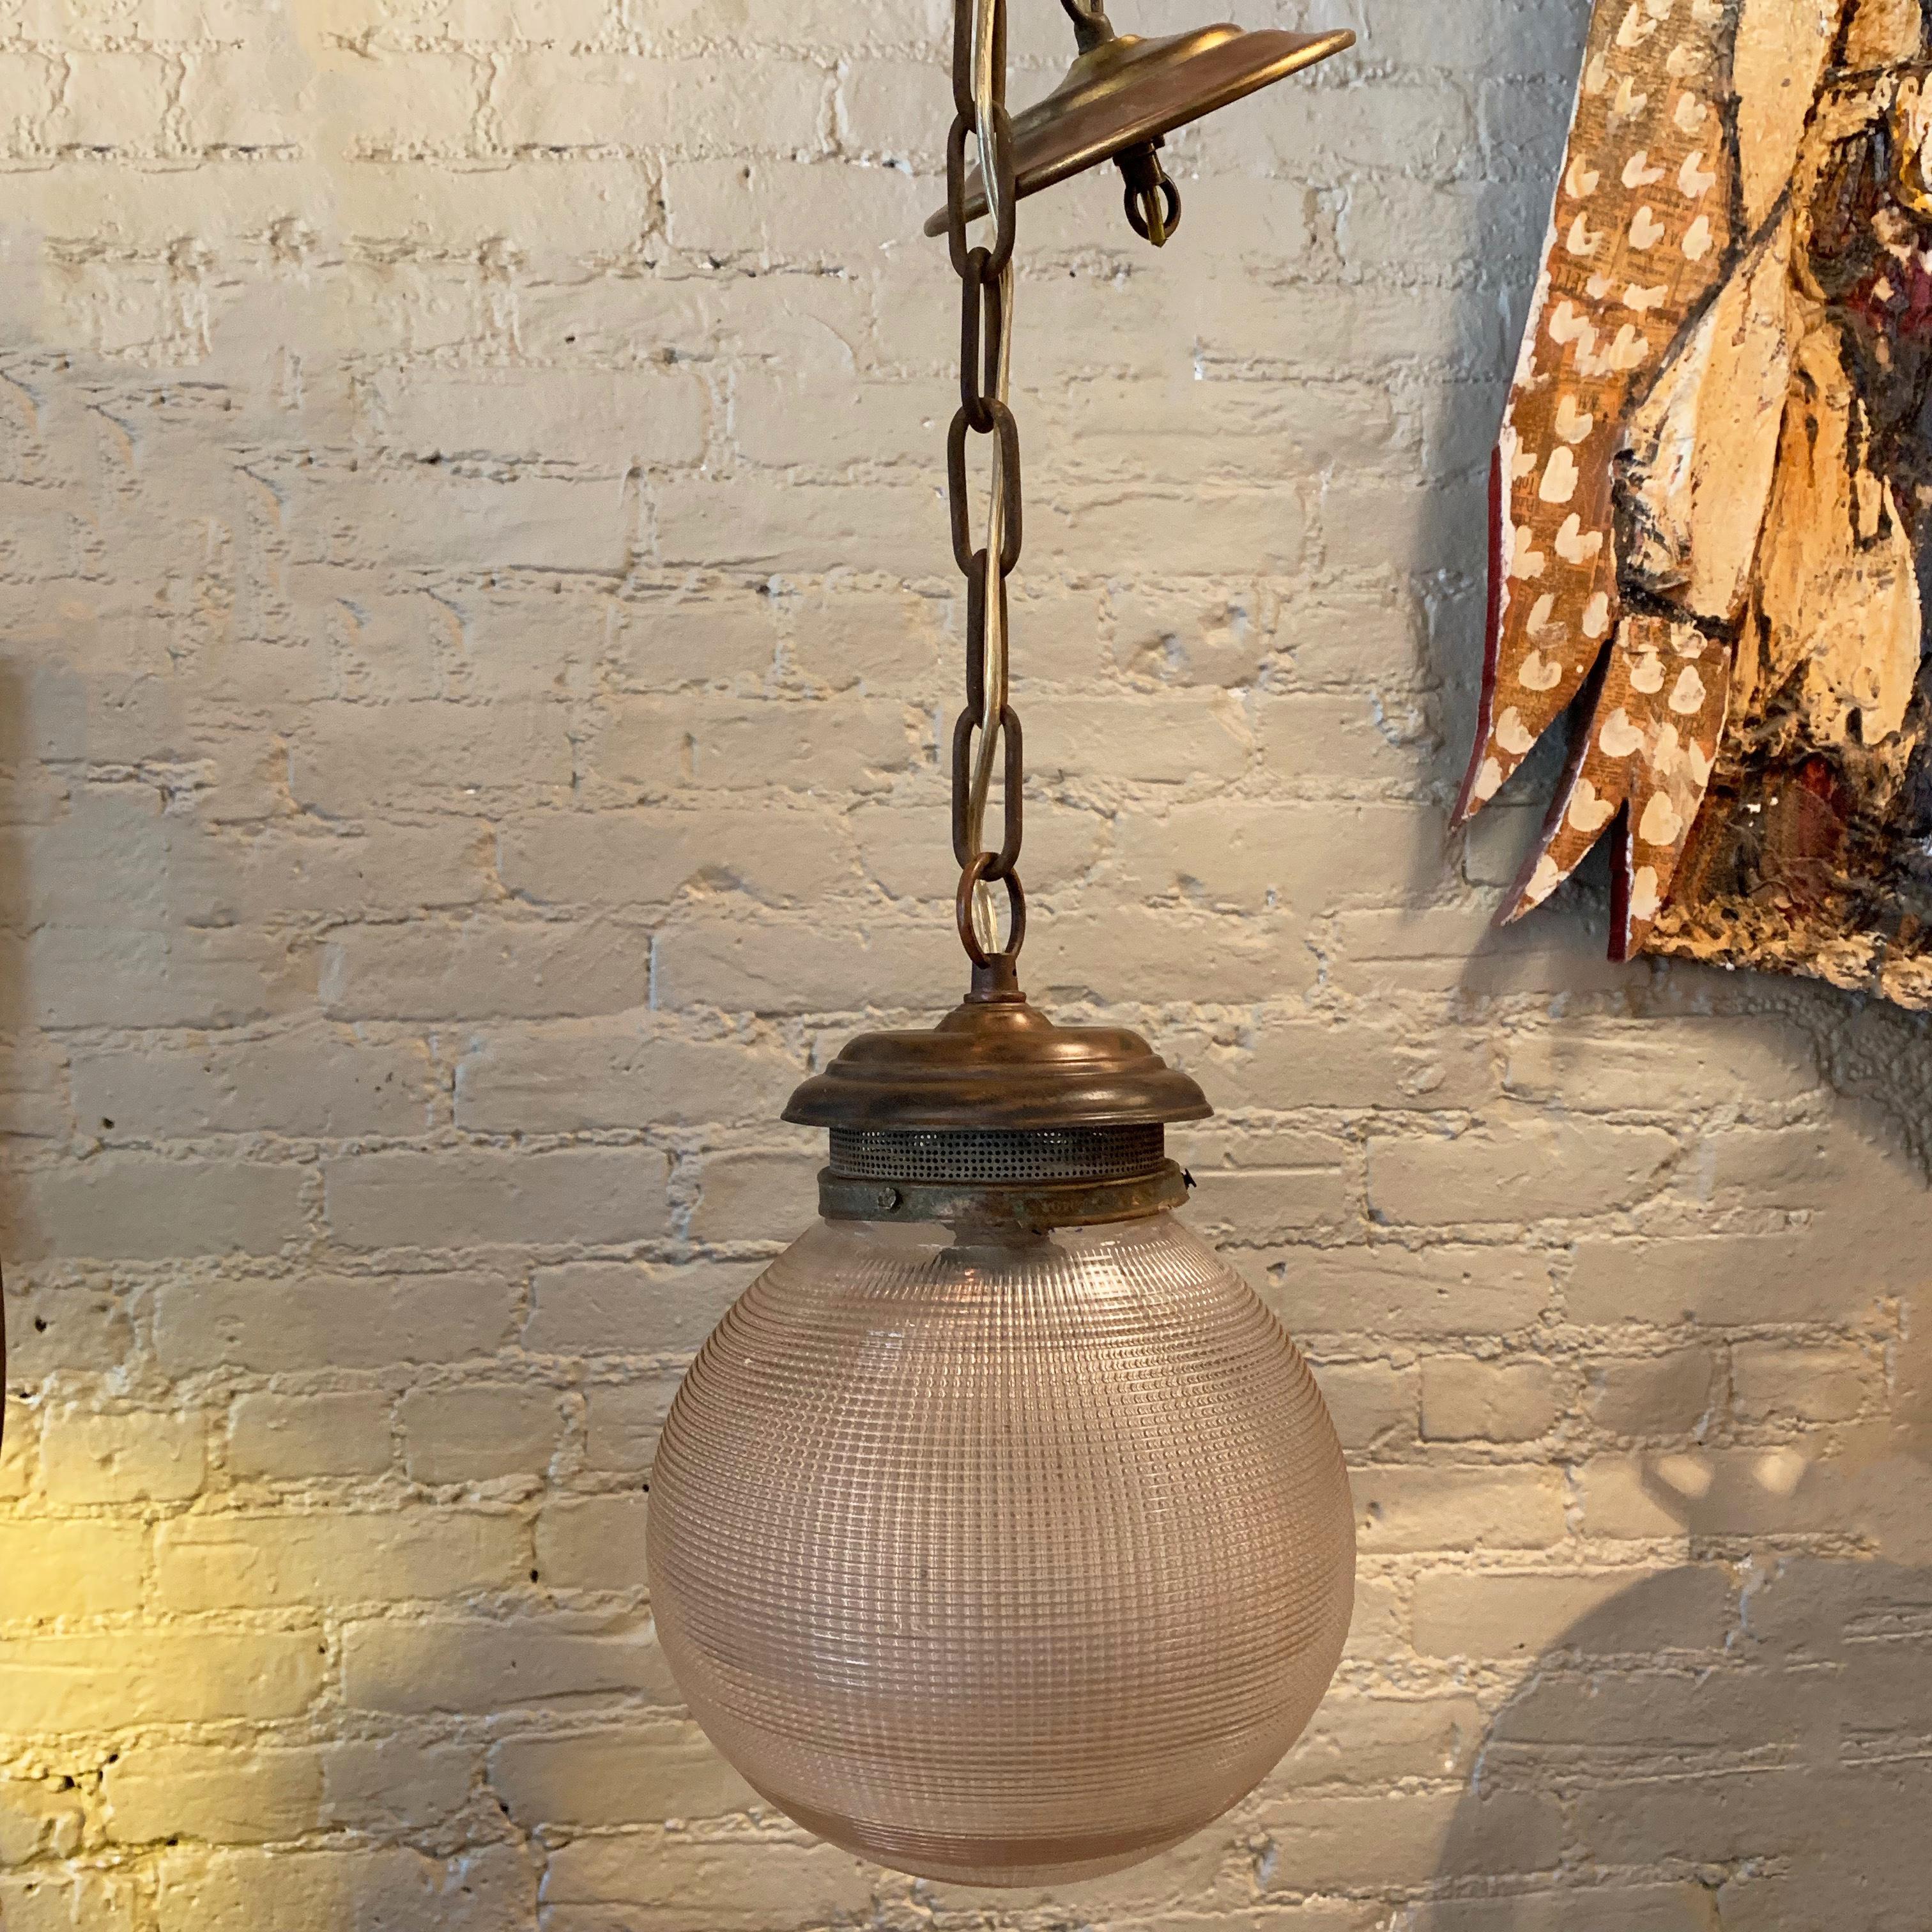 Early 20th century, industrial pendant light features an 8 inch, prismatic, Holophane glass globe shade with a brass fitter, chain and ceiling canopy. The full hanging length if the pendant is 37 inches.